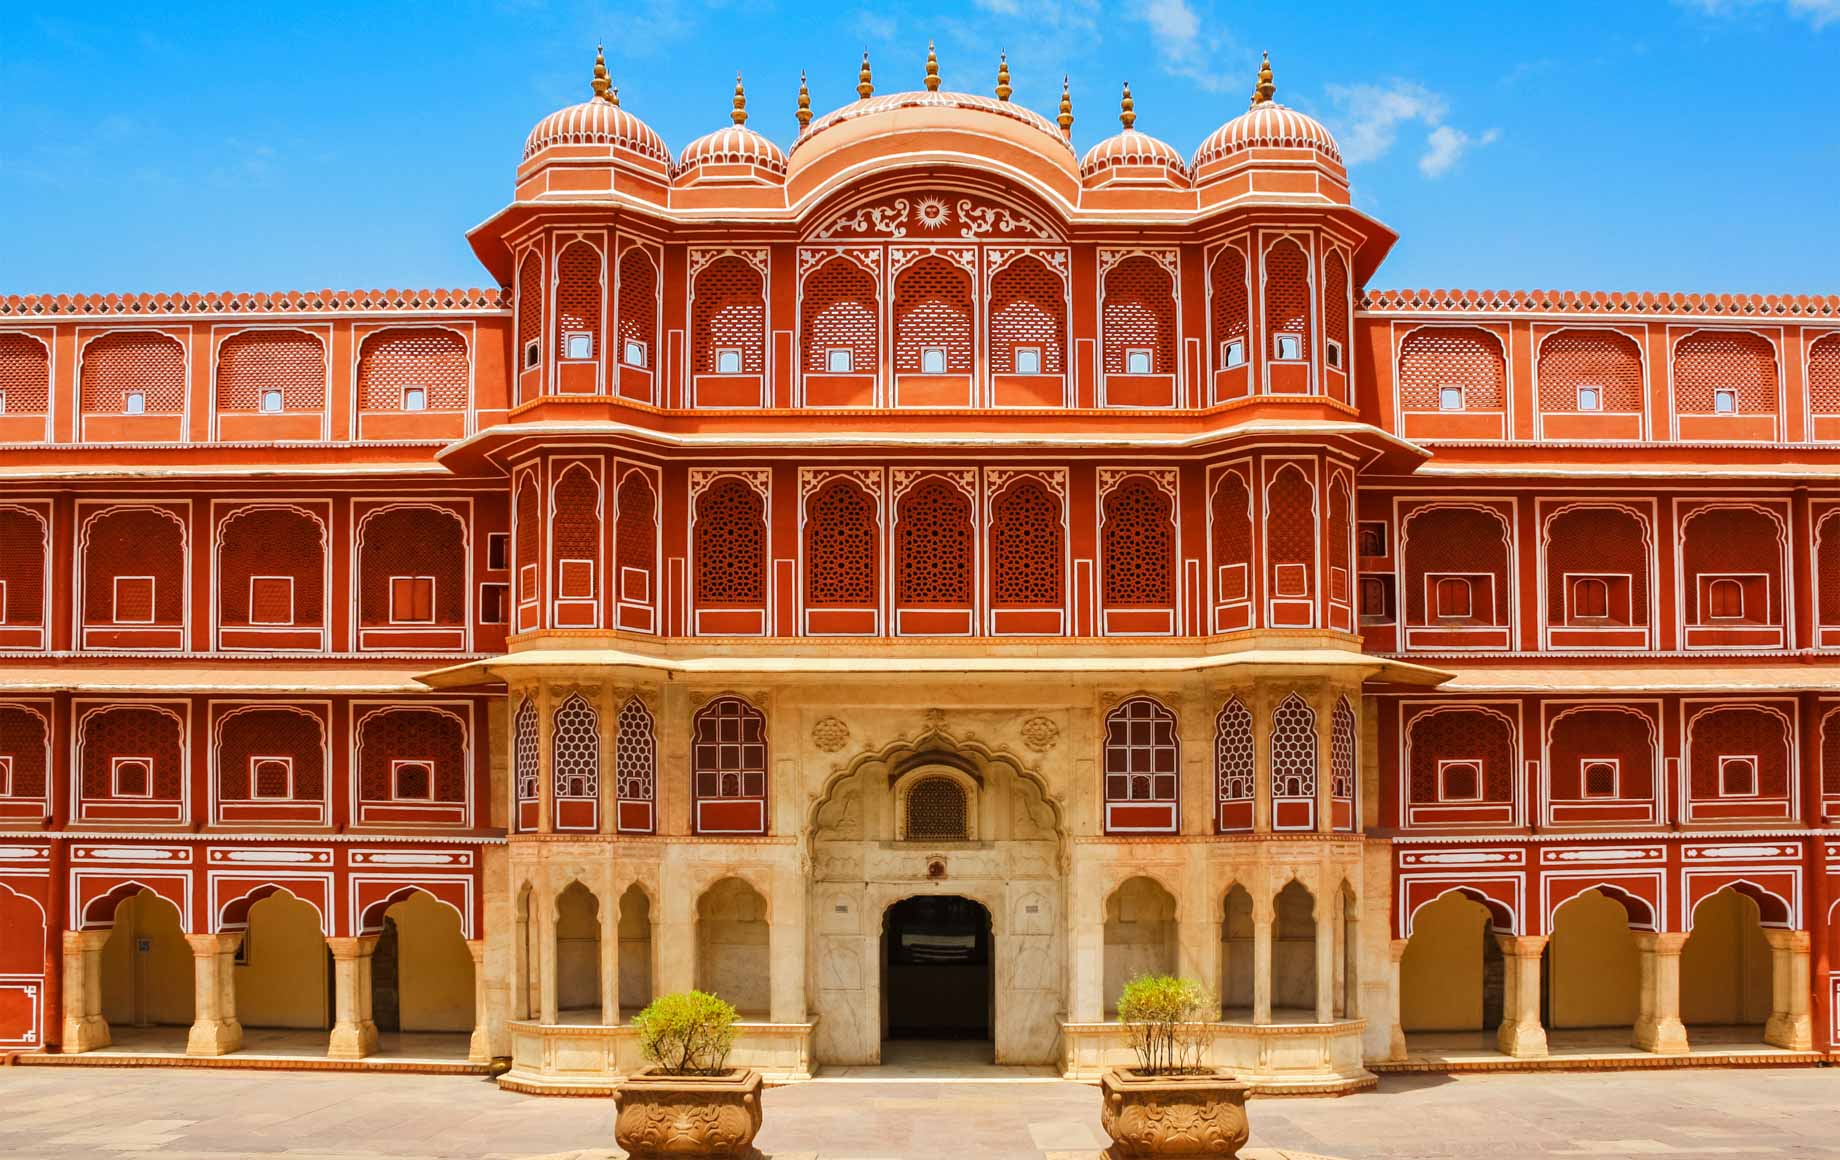 Jaipur Architecture and Bright Sky